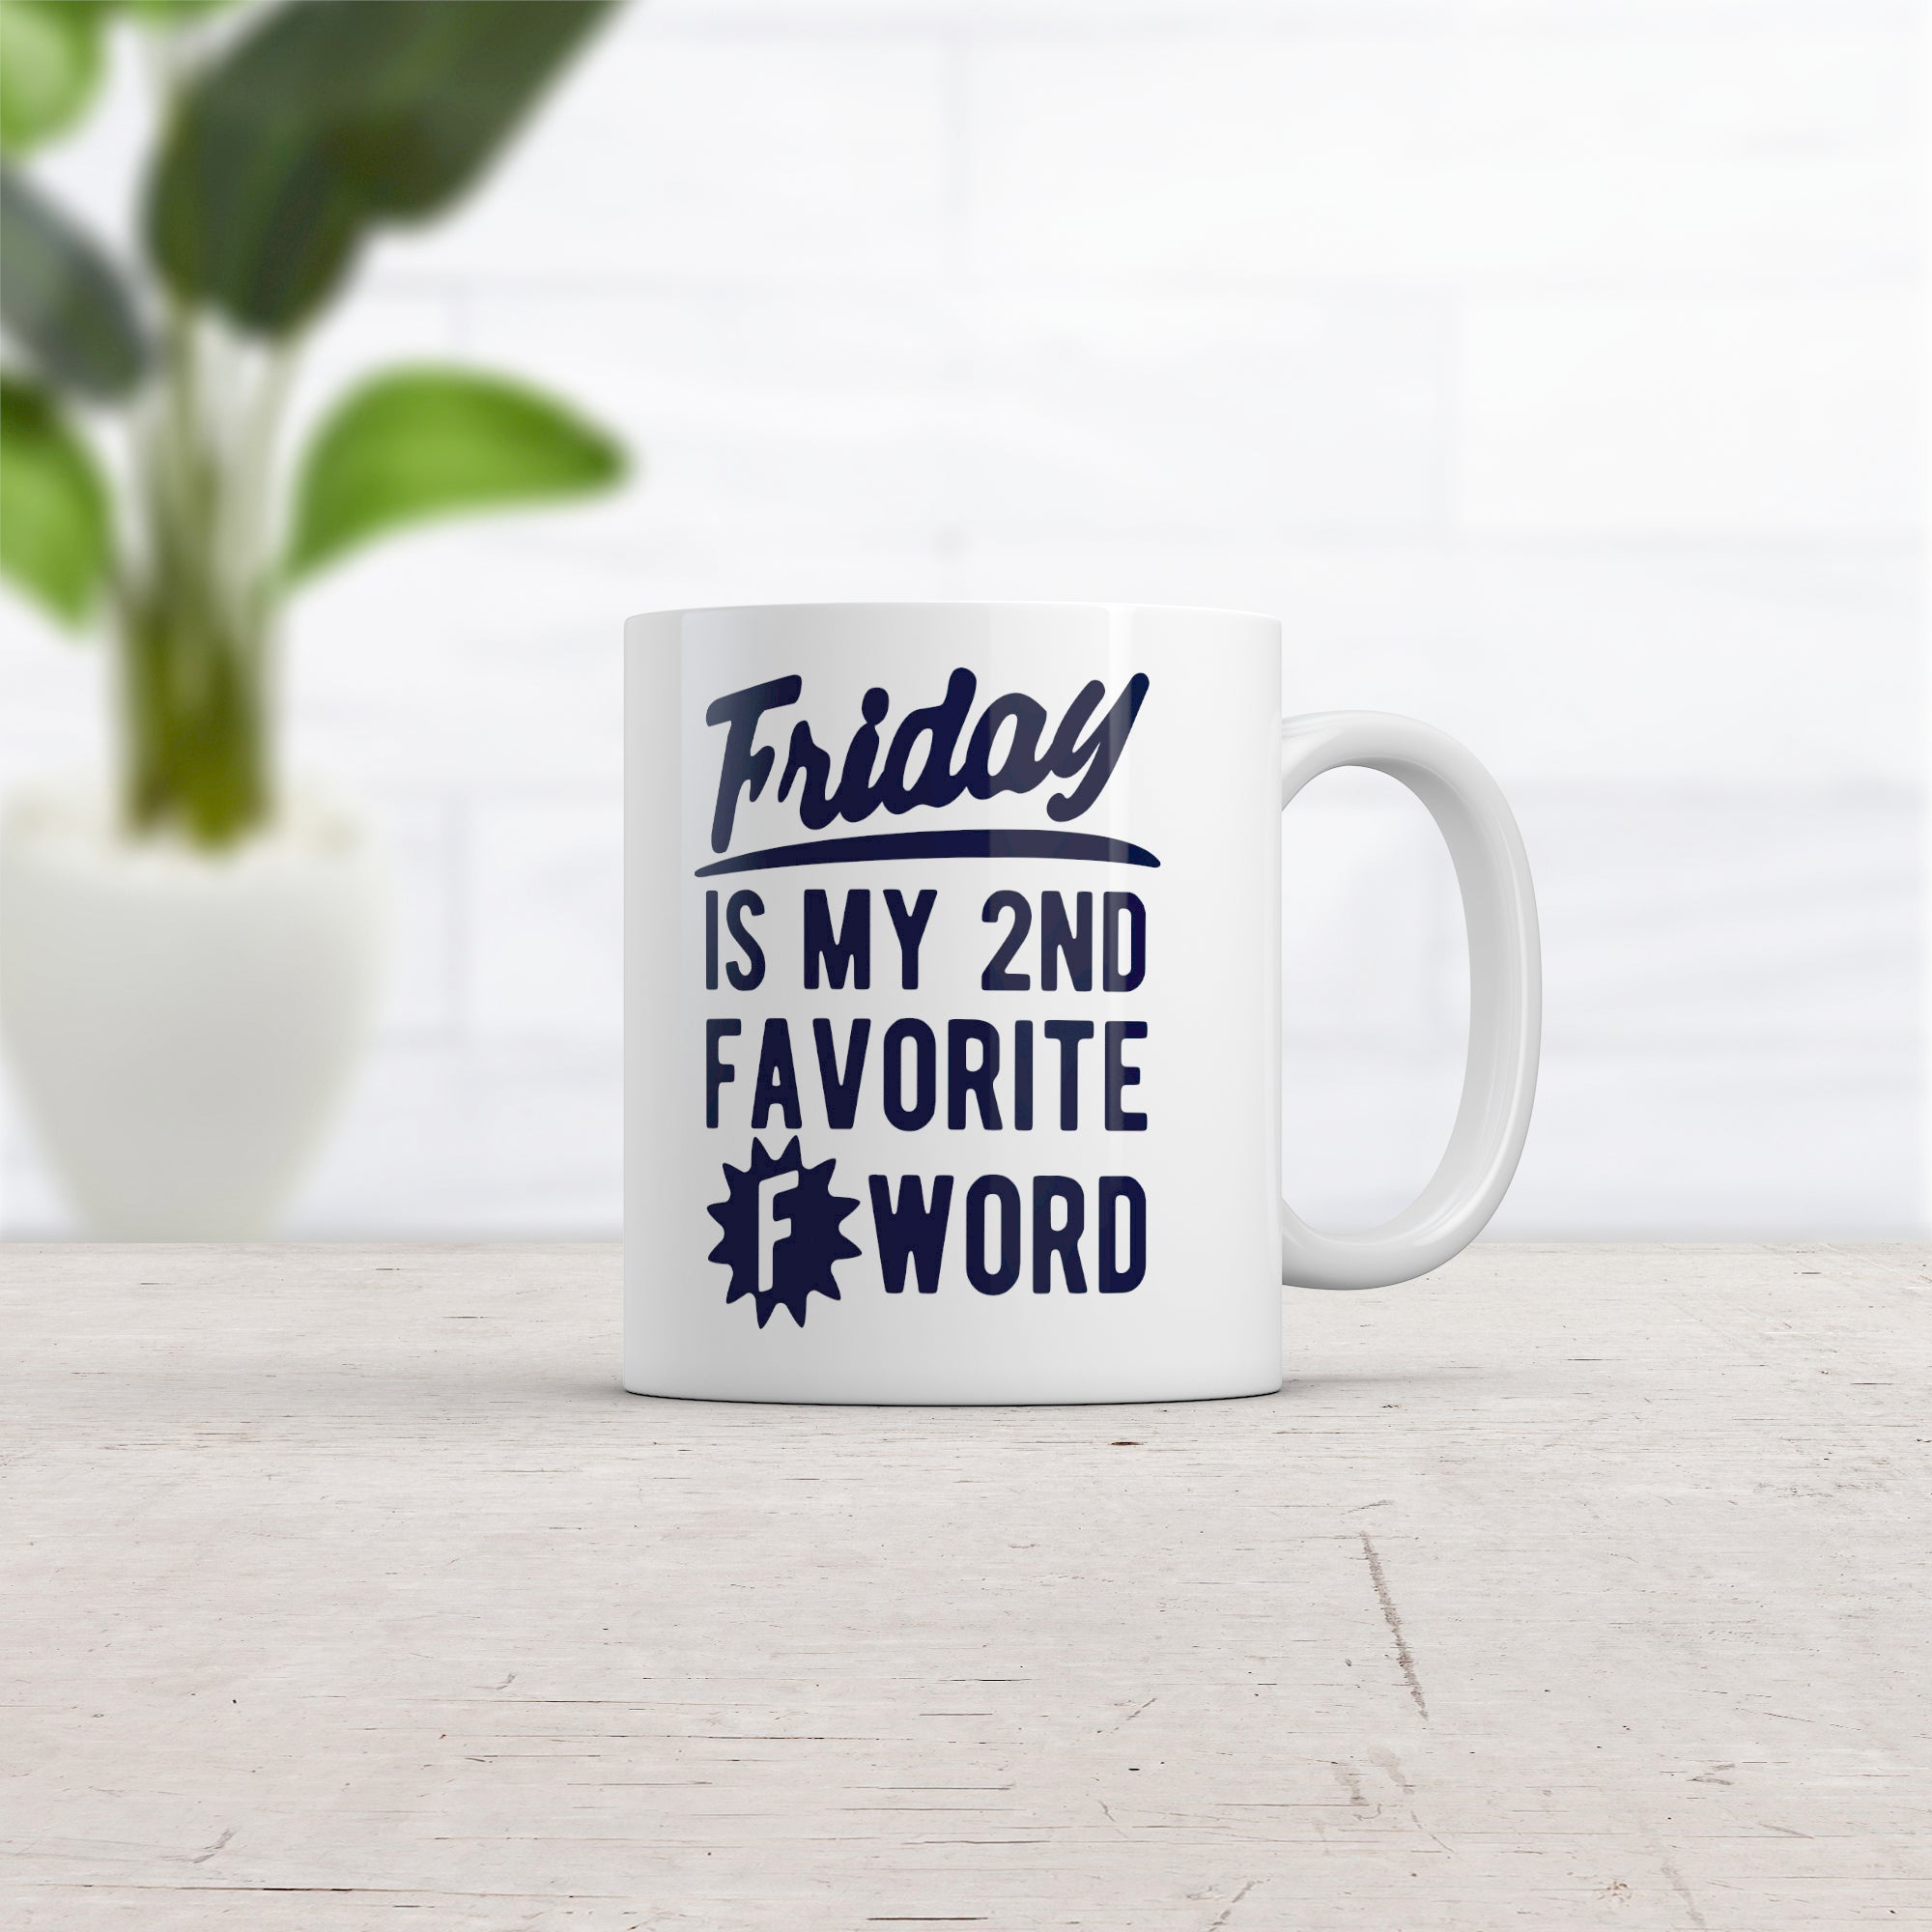 Funny White Friday Is My Second Favorite F Word Coffee Mug Nerdy sarcastic Tee